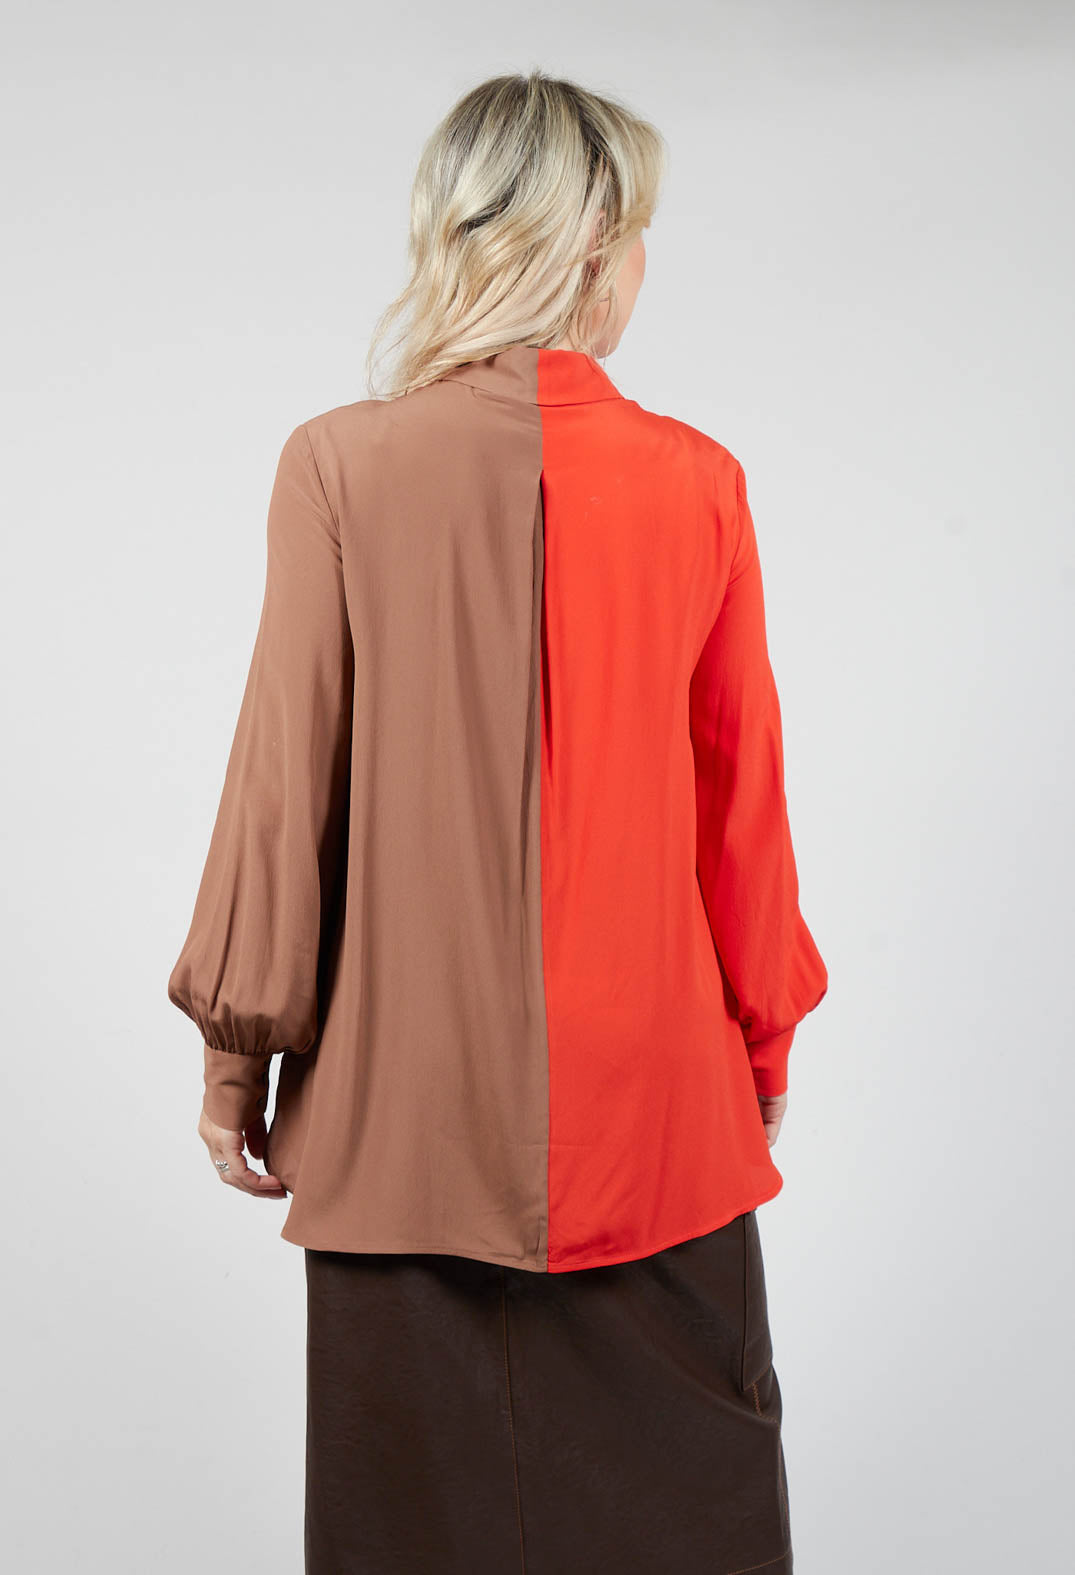 Contrast Tailored Shirt in Orange / Brown